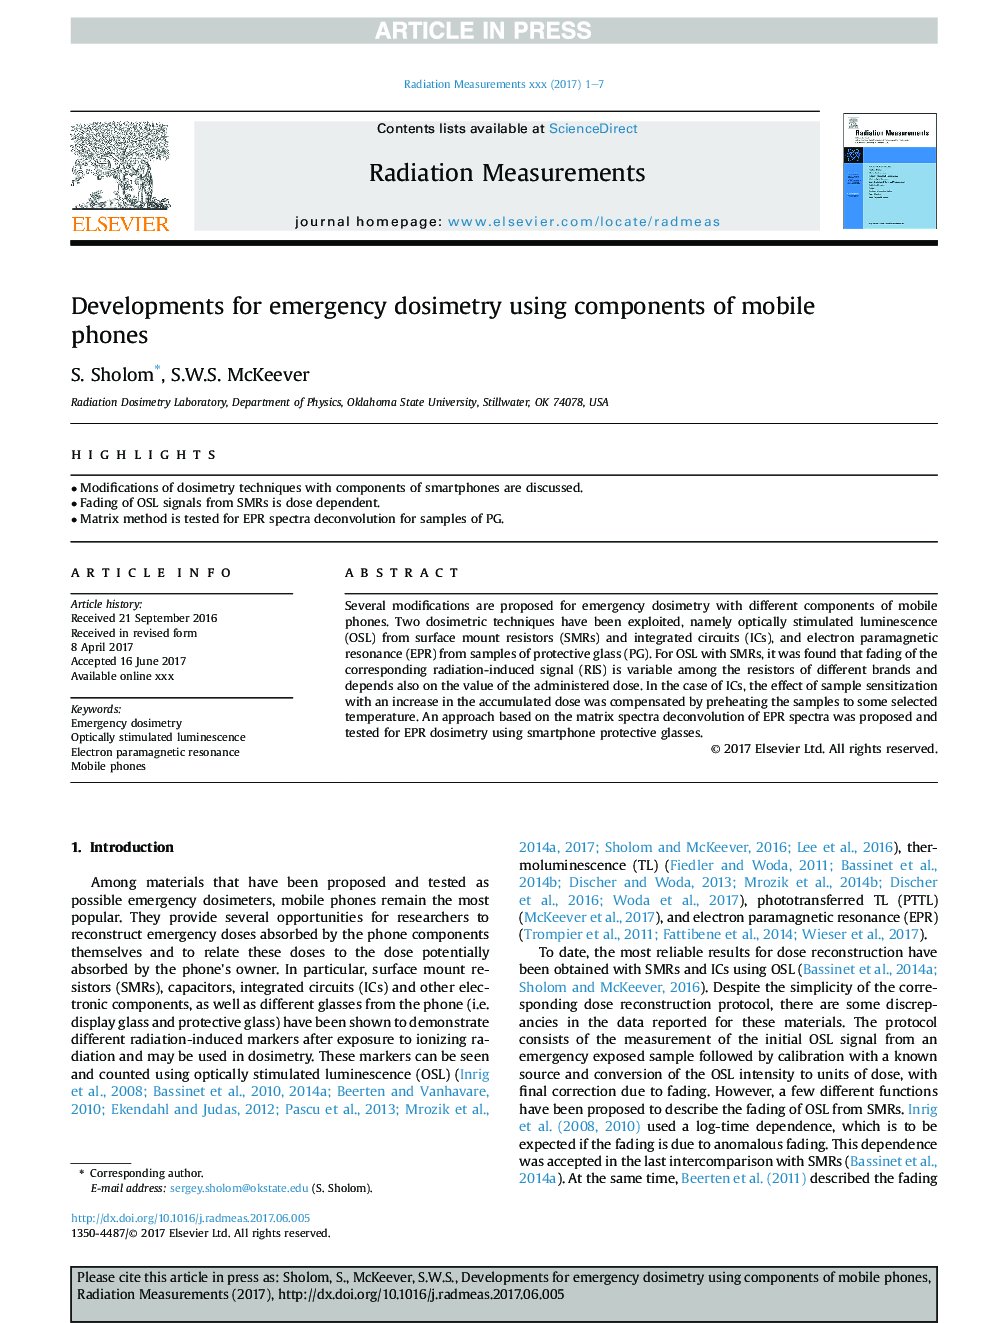 Developments for emergency dosimetry using components of mobile phones